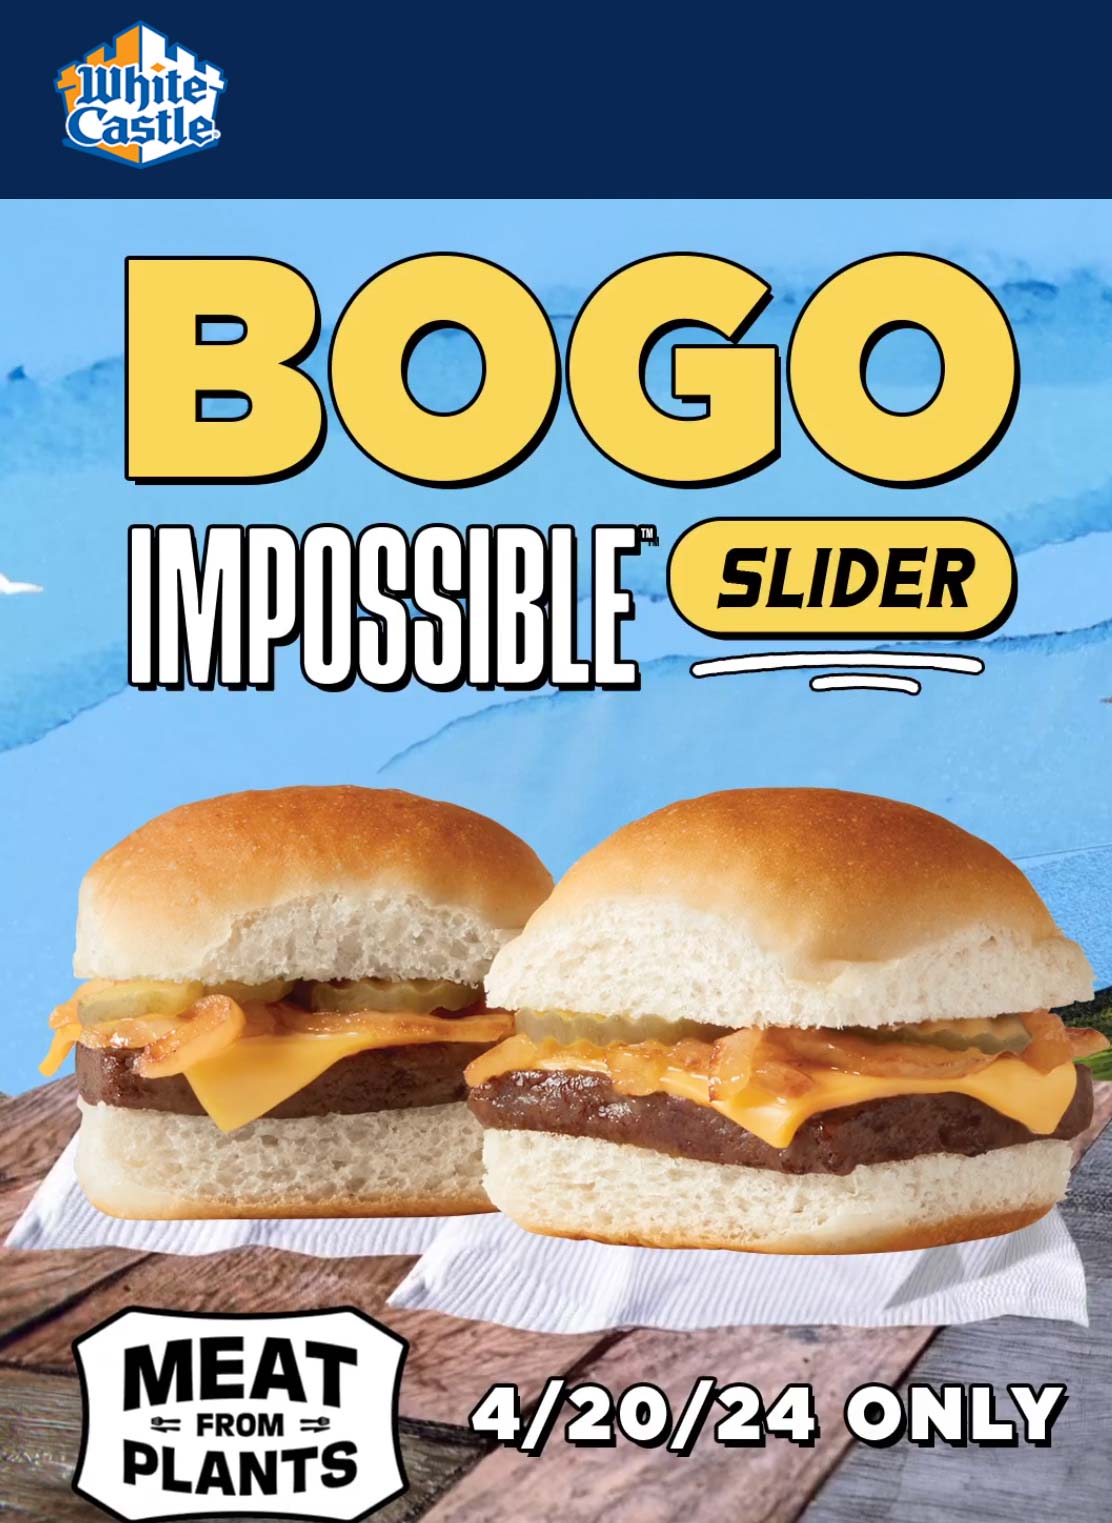 White Castle restaurants Coupon  Second impossible slider cheeseburger free today at White Castle #whitecastle 